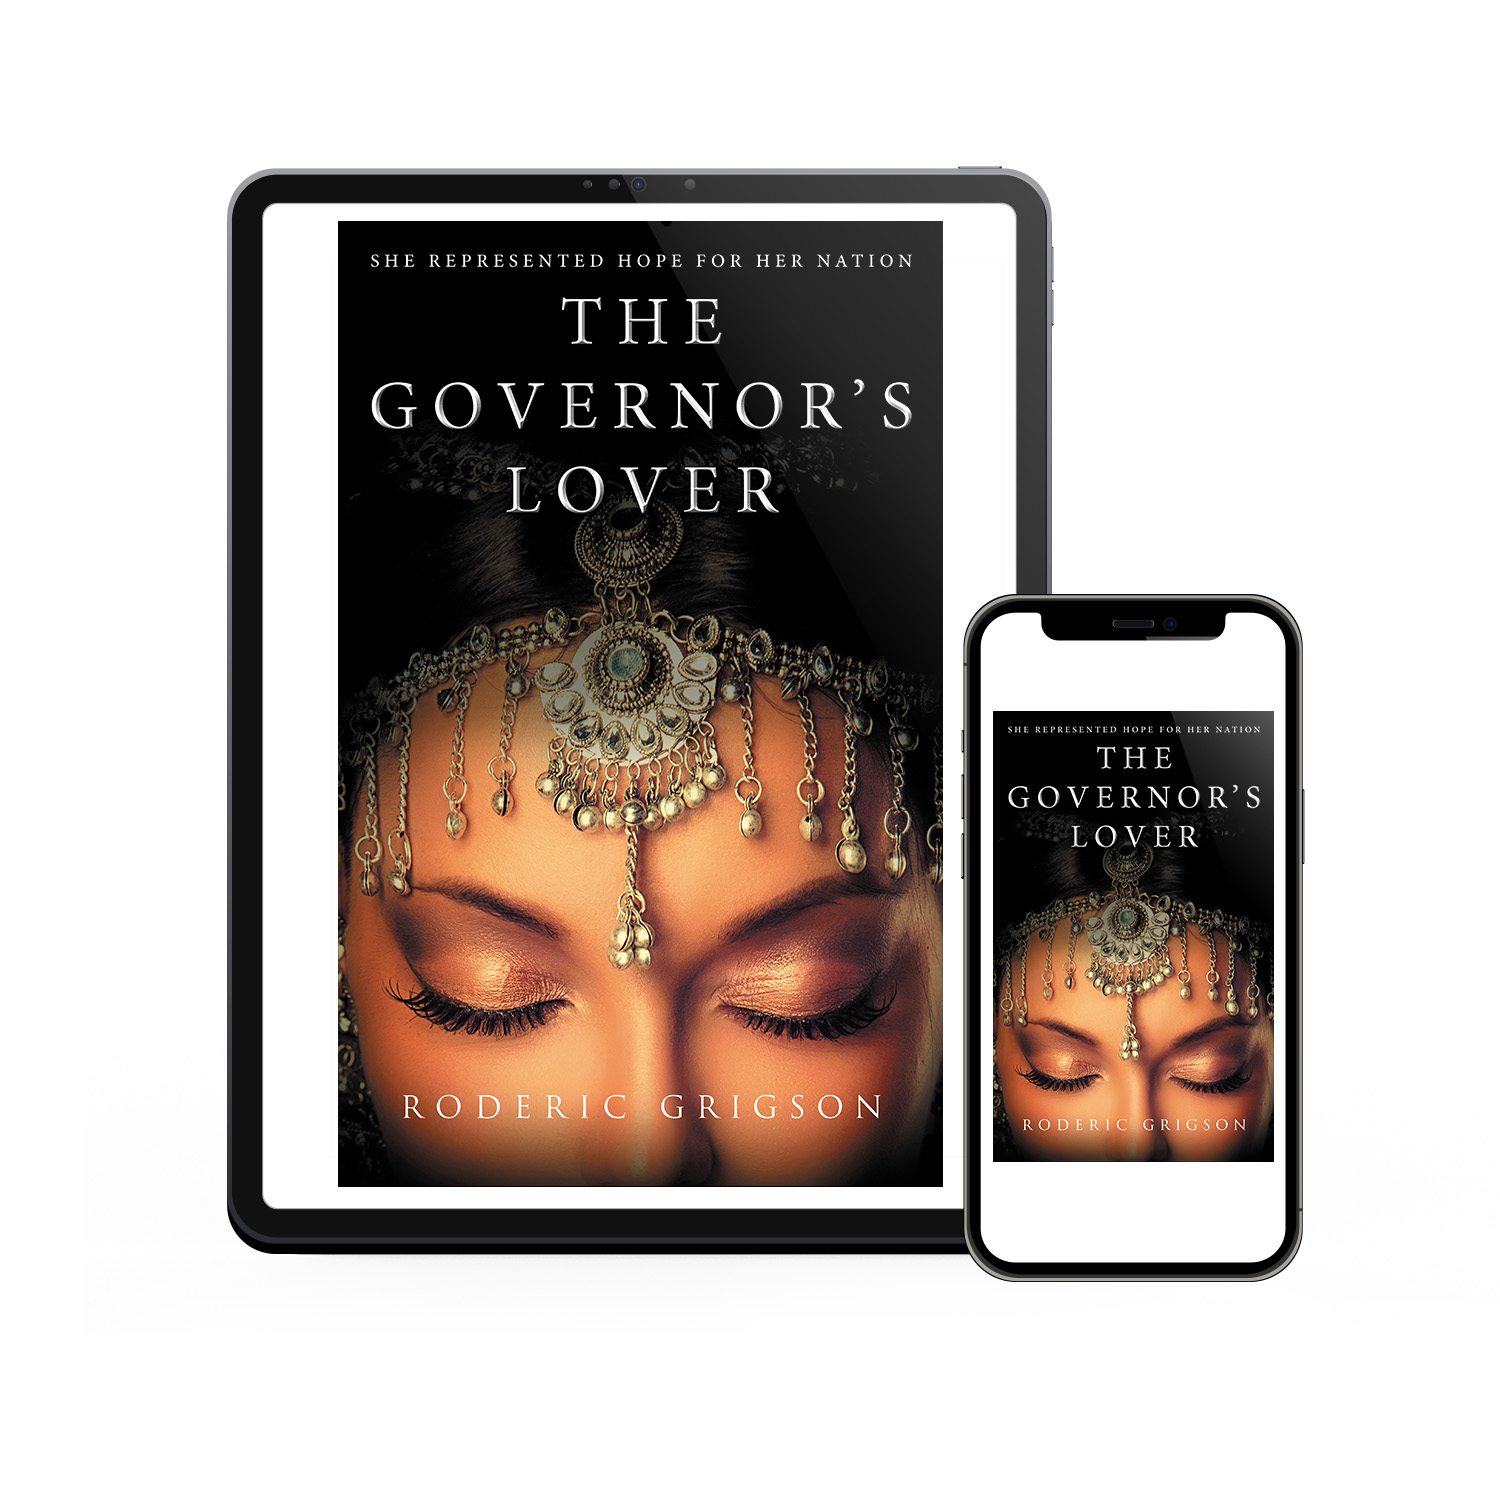 'The Governor's Lover' is a sweeping historical romance set in Colonial Ceylon in the early 19th Century. The author is Roderic Grigson. The book cover and interior design are by Mark Thomas. To learn more about what Mark could do for your book, please visit coverness.com.